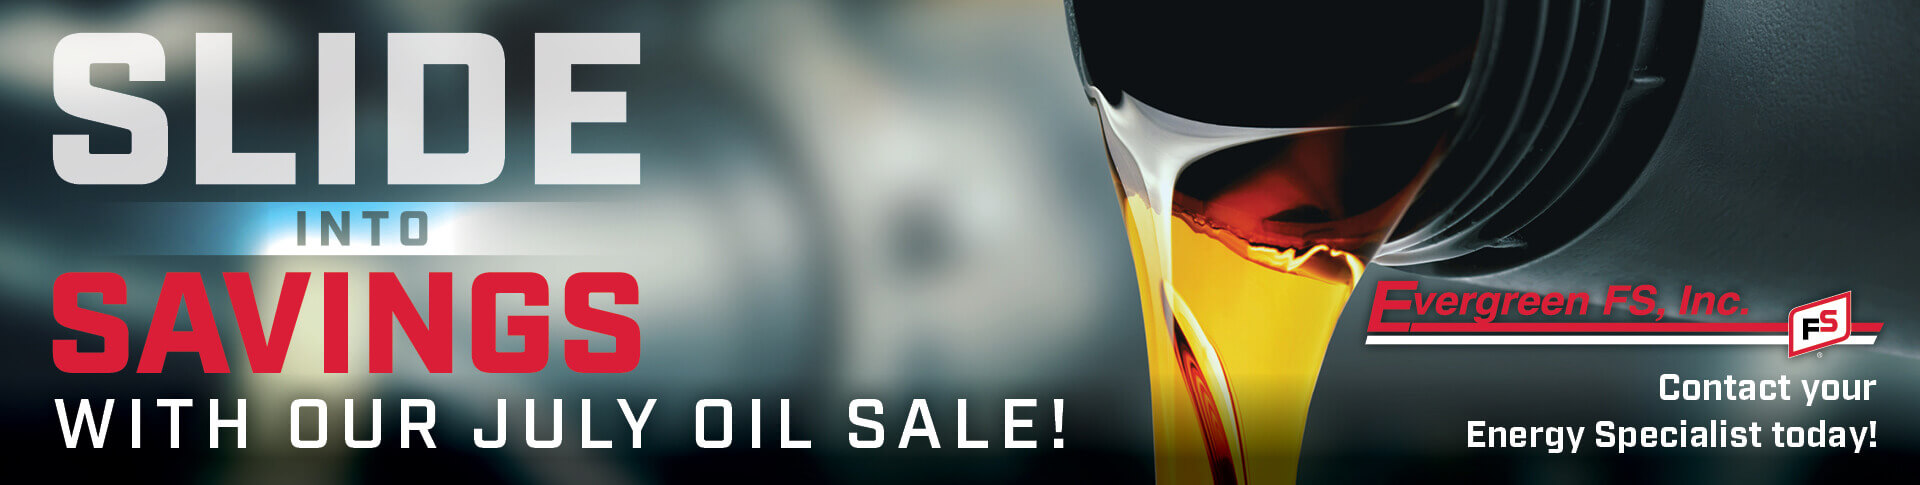 Oil-Sale-July-Evergree-FS-lubricants-DEF